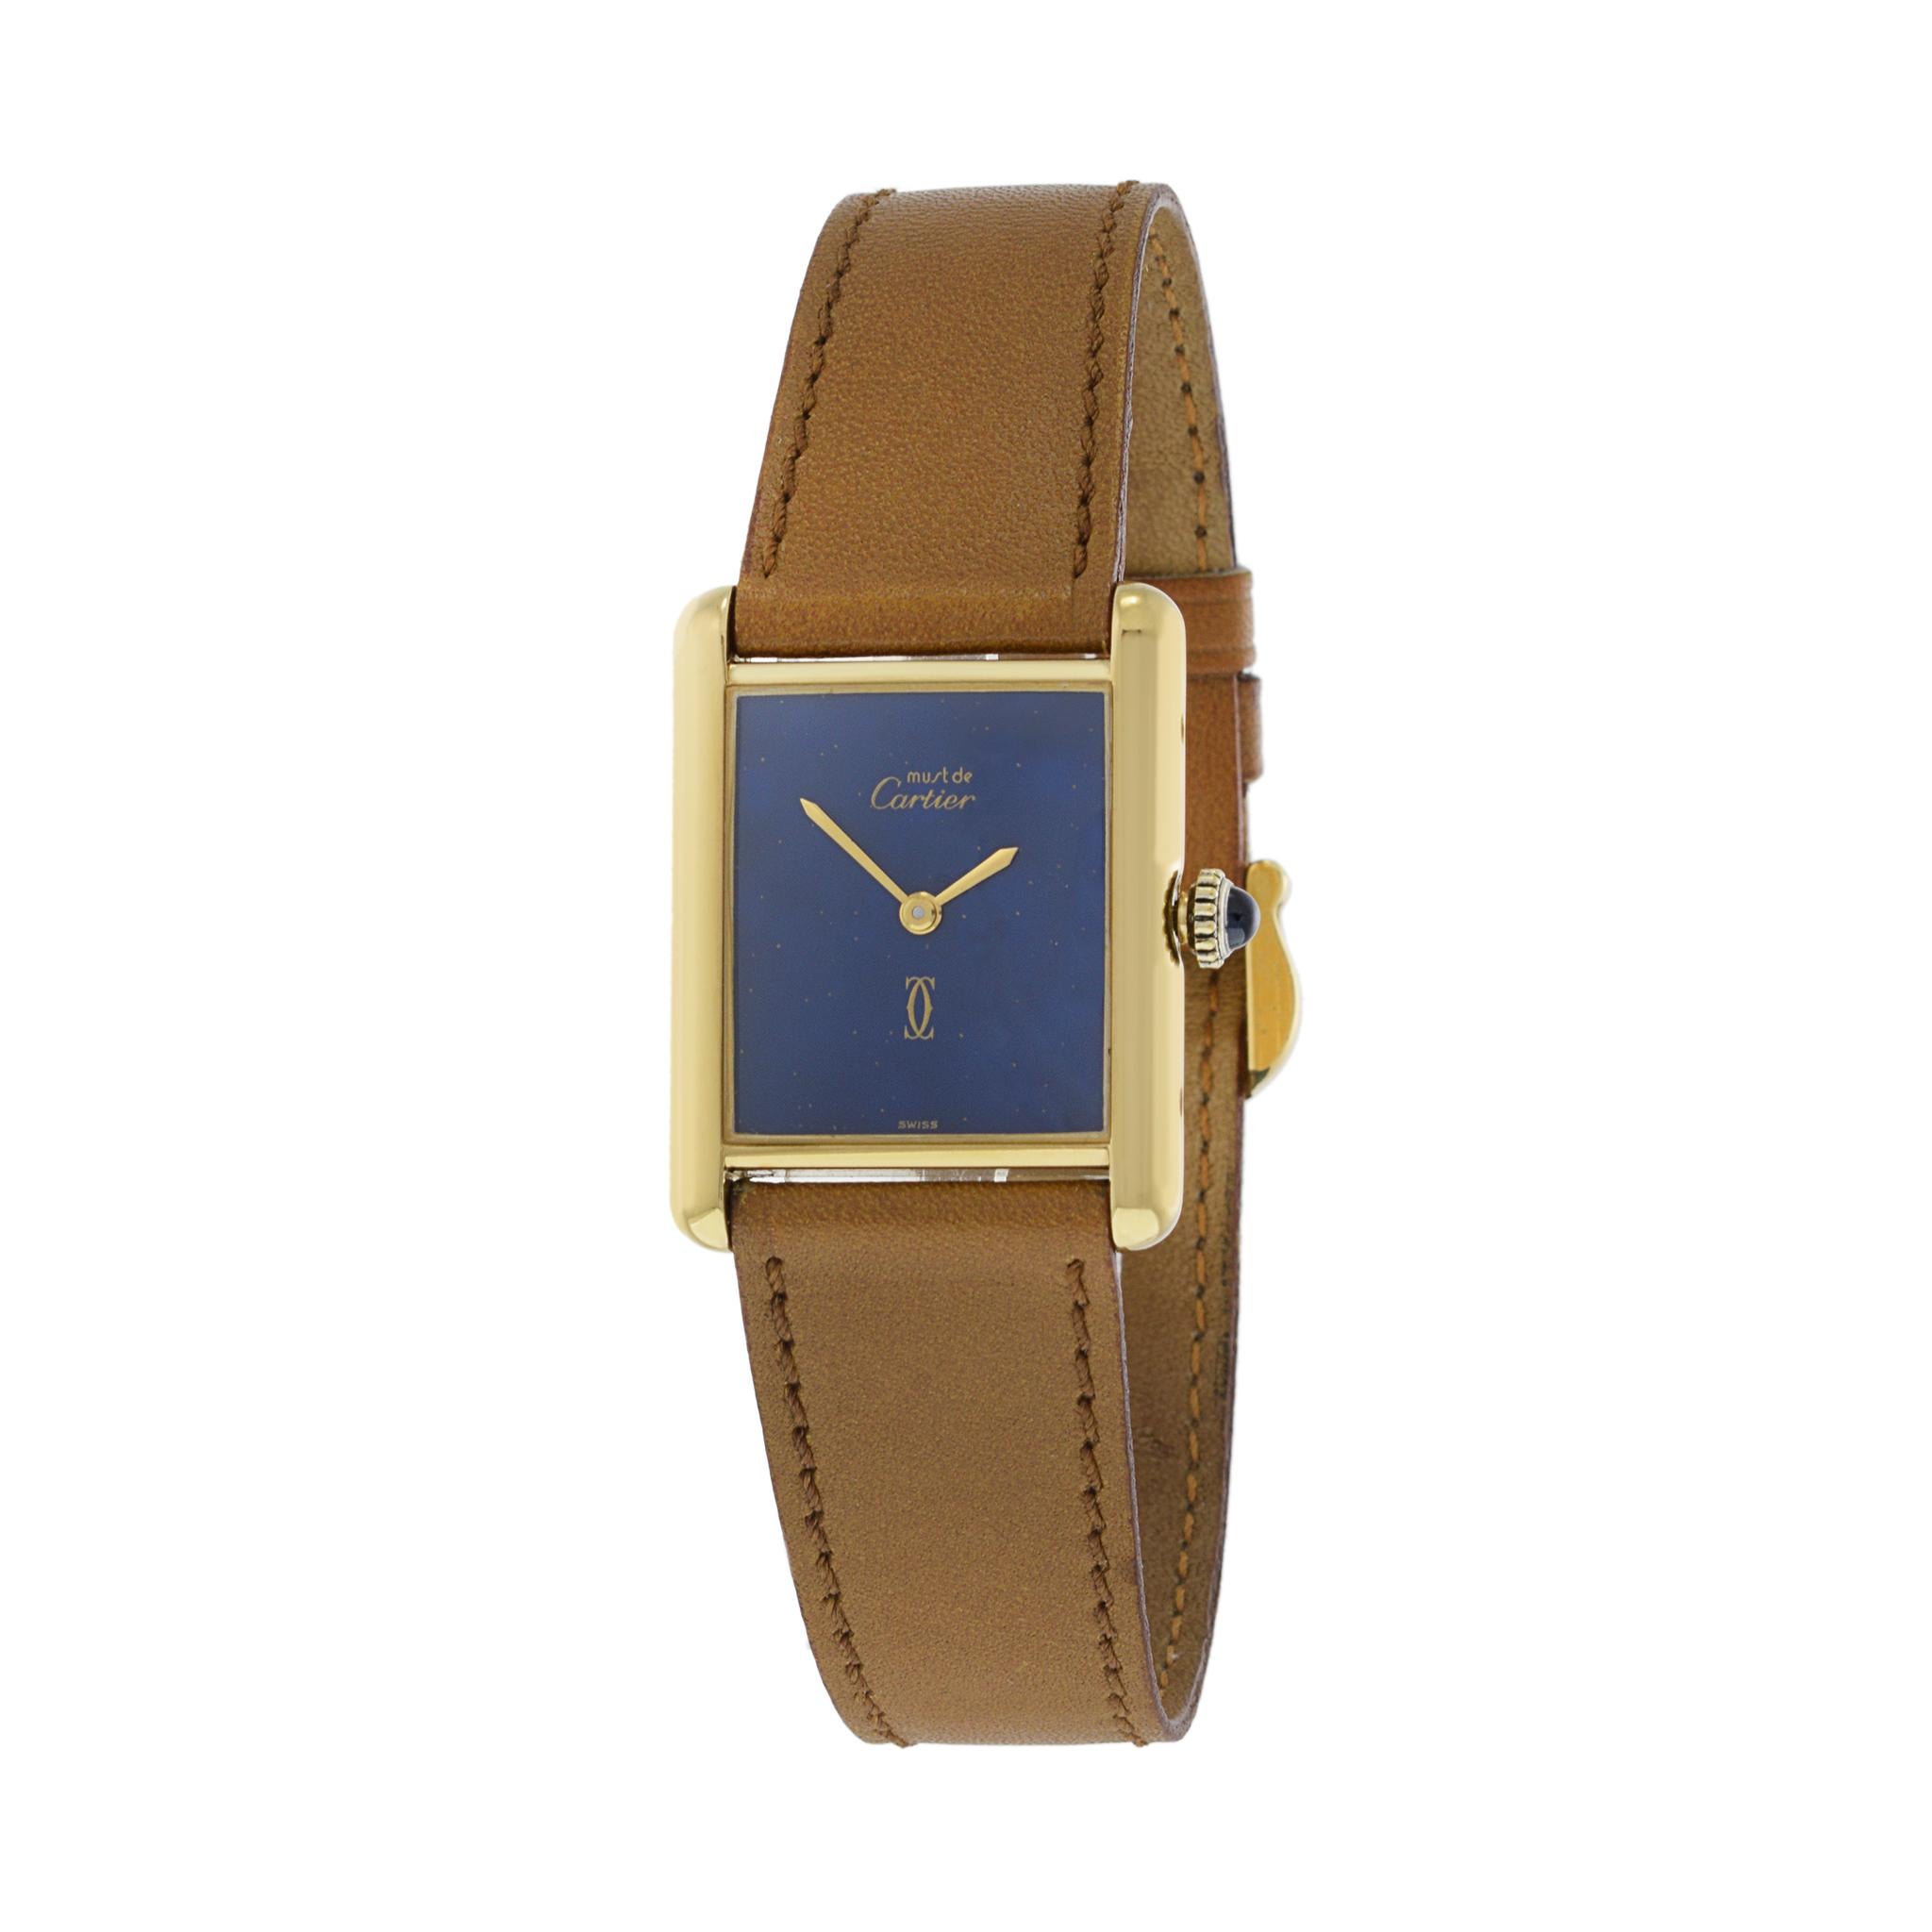 This is a beautiful mid size Cartier Must de Cartier vermeil tank watch. This watch is manually wound. The outstanding feature of this example is its real lapis stone dial. 

The case of this watch is 23.5mm x 30.5mm which is considered Cartier's